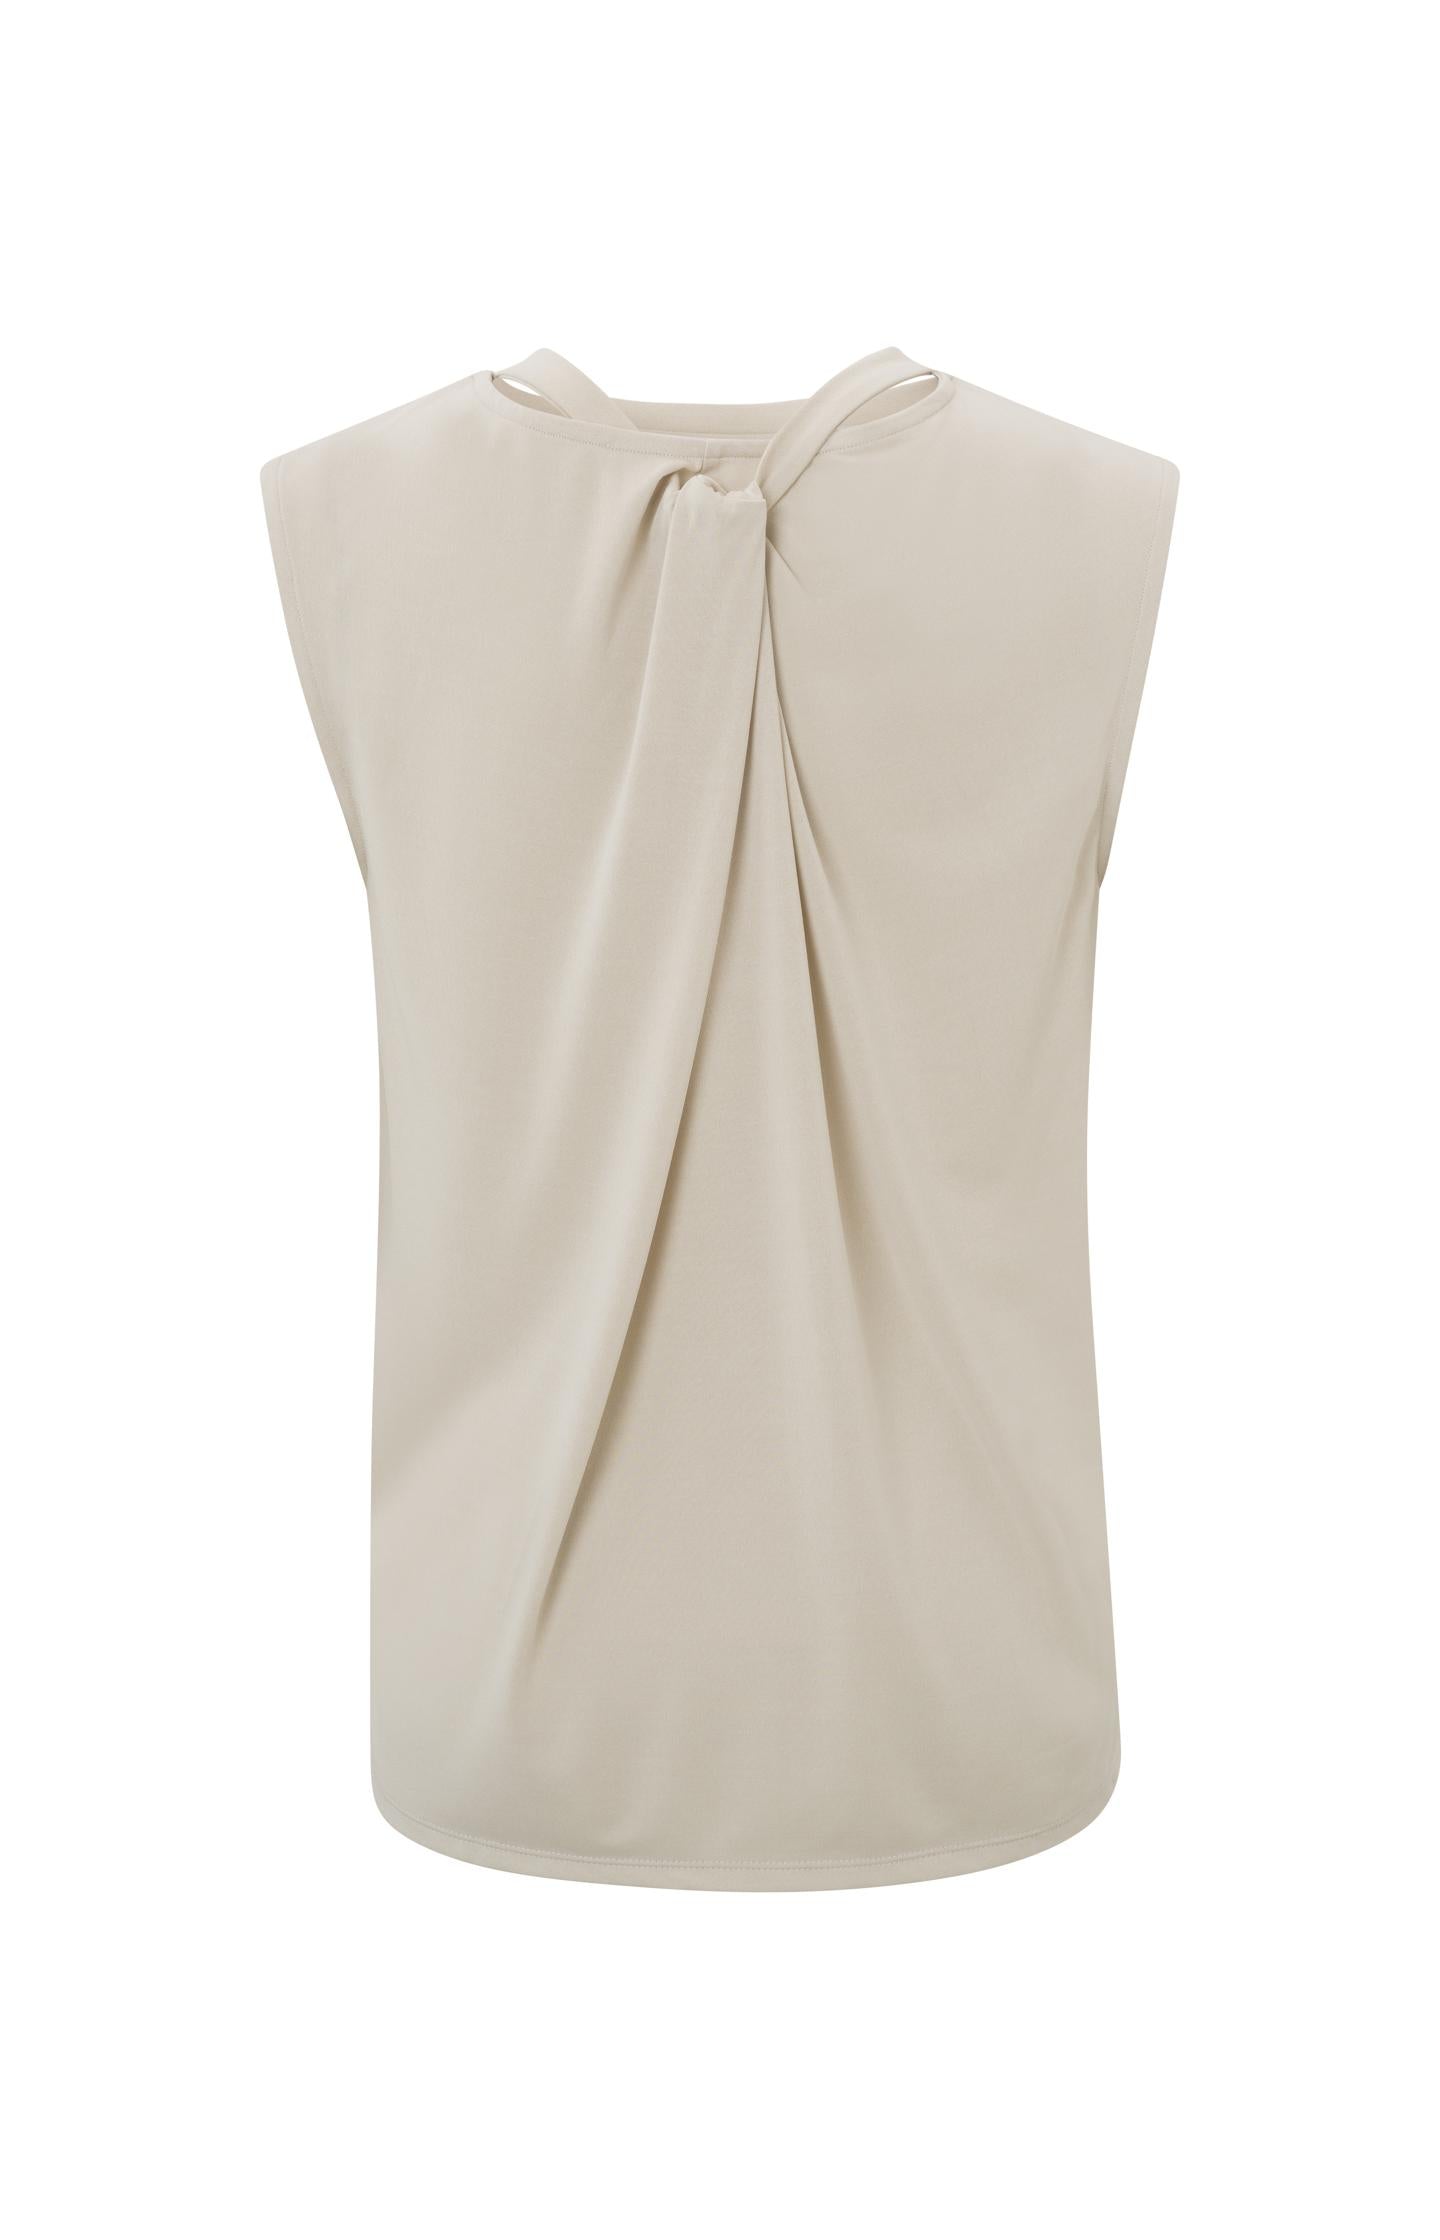 Sleeveless top with crewneck and back detail in regular fit